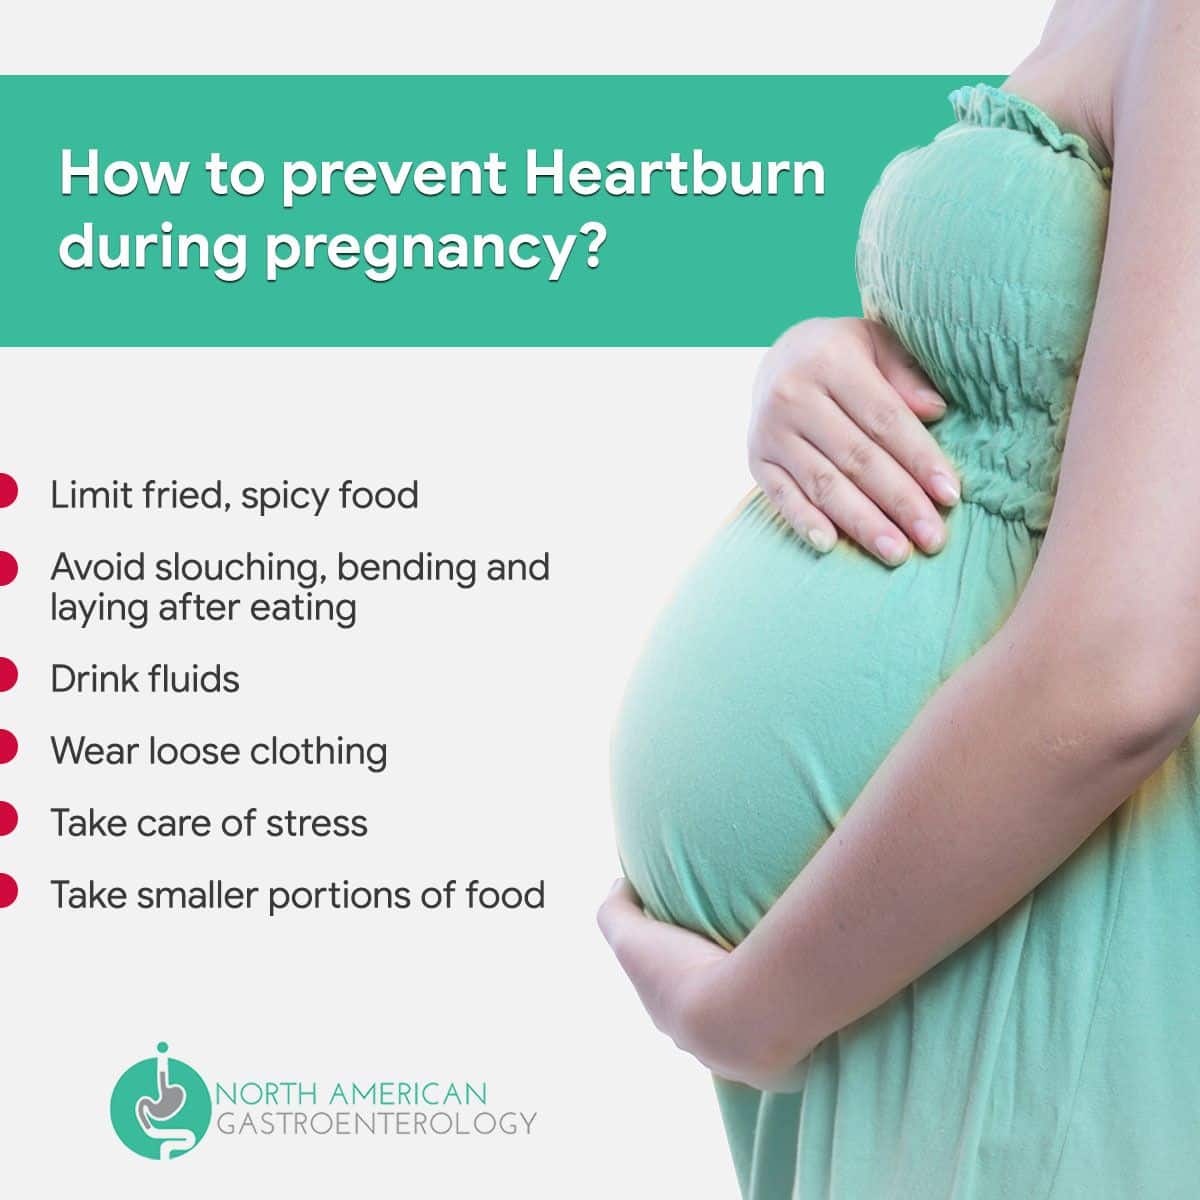 How To Treat Heartburn And Indigestion During Pregnancy  ho.modulartz.com